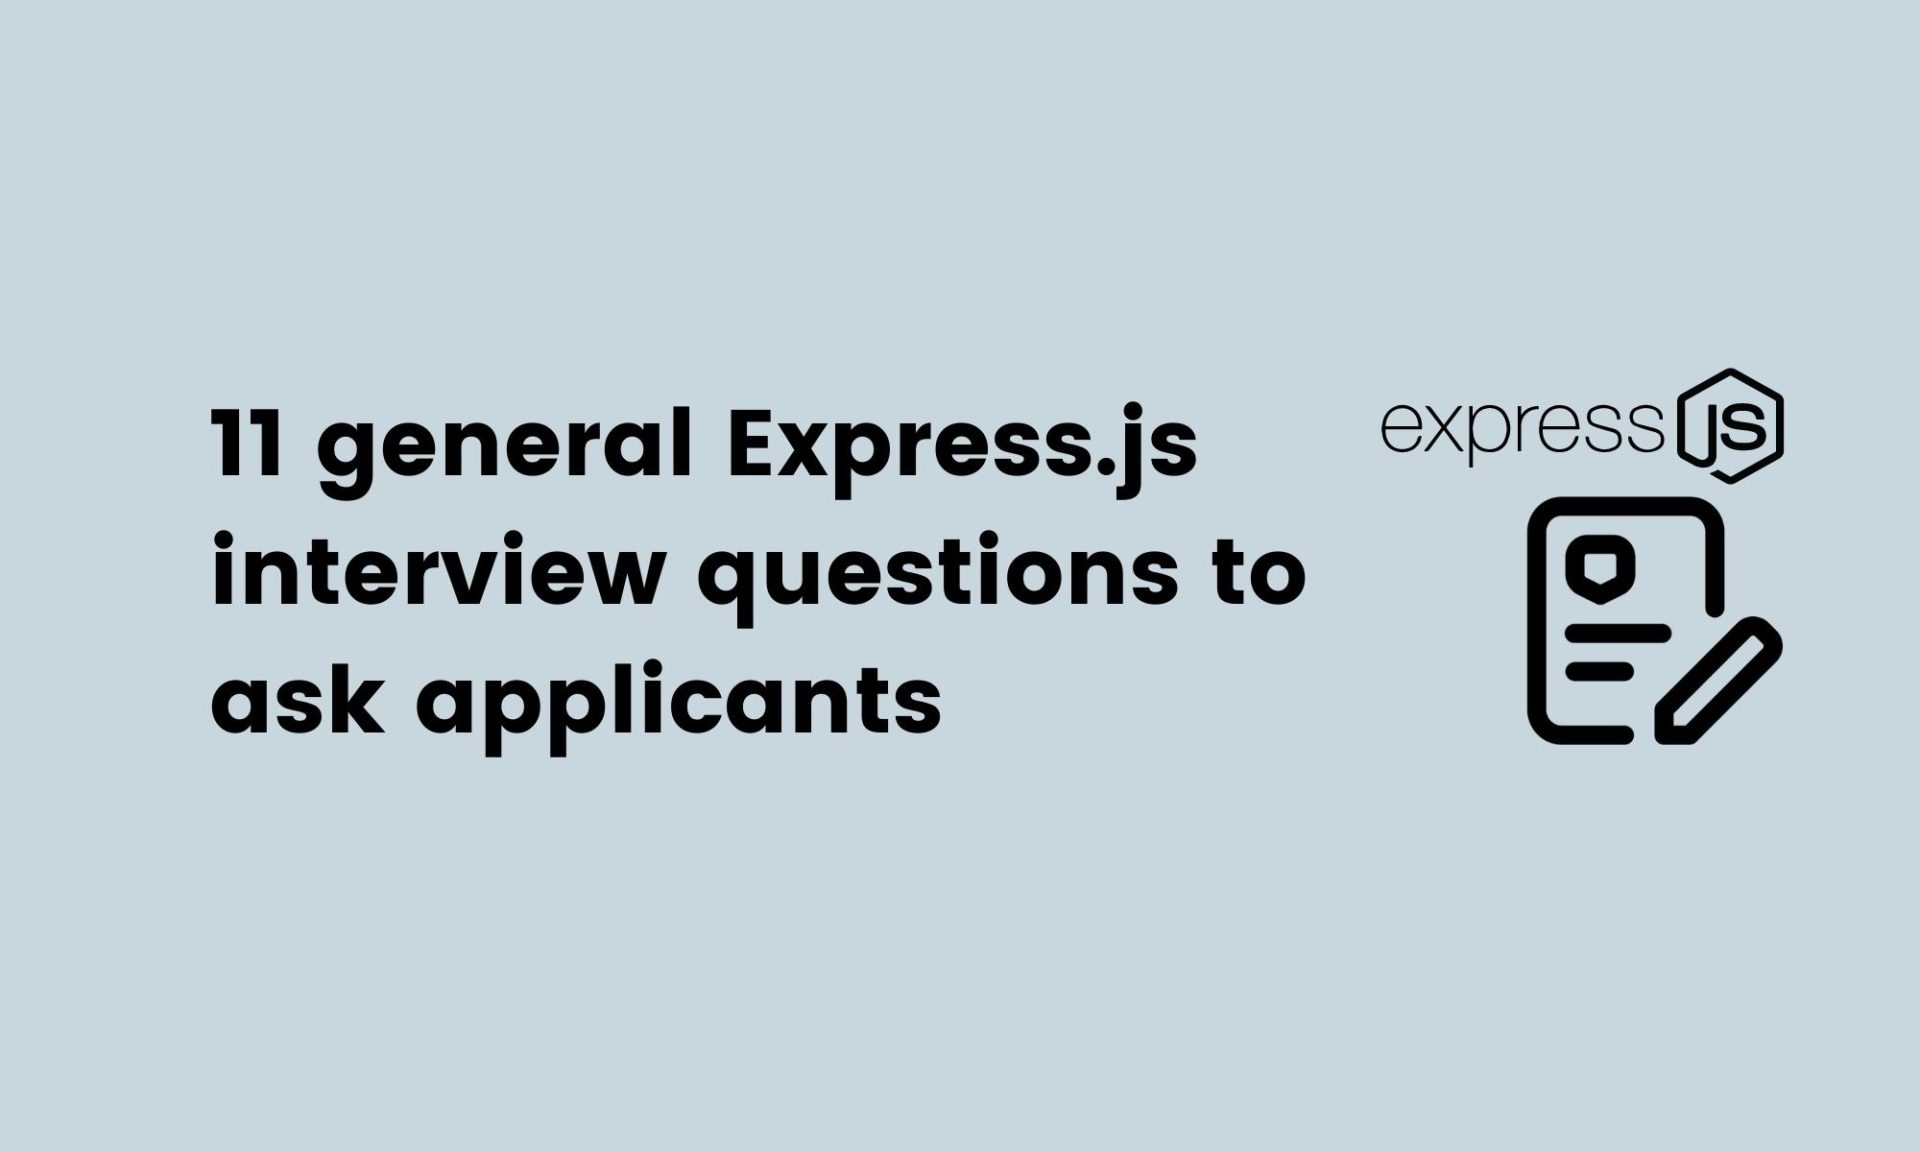 11 general Express.js interview questions to ask applicants